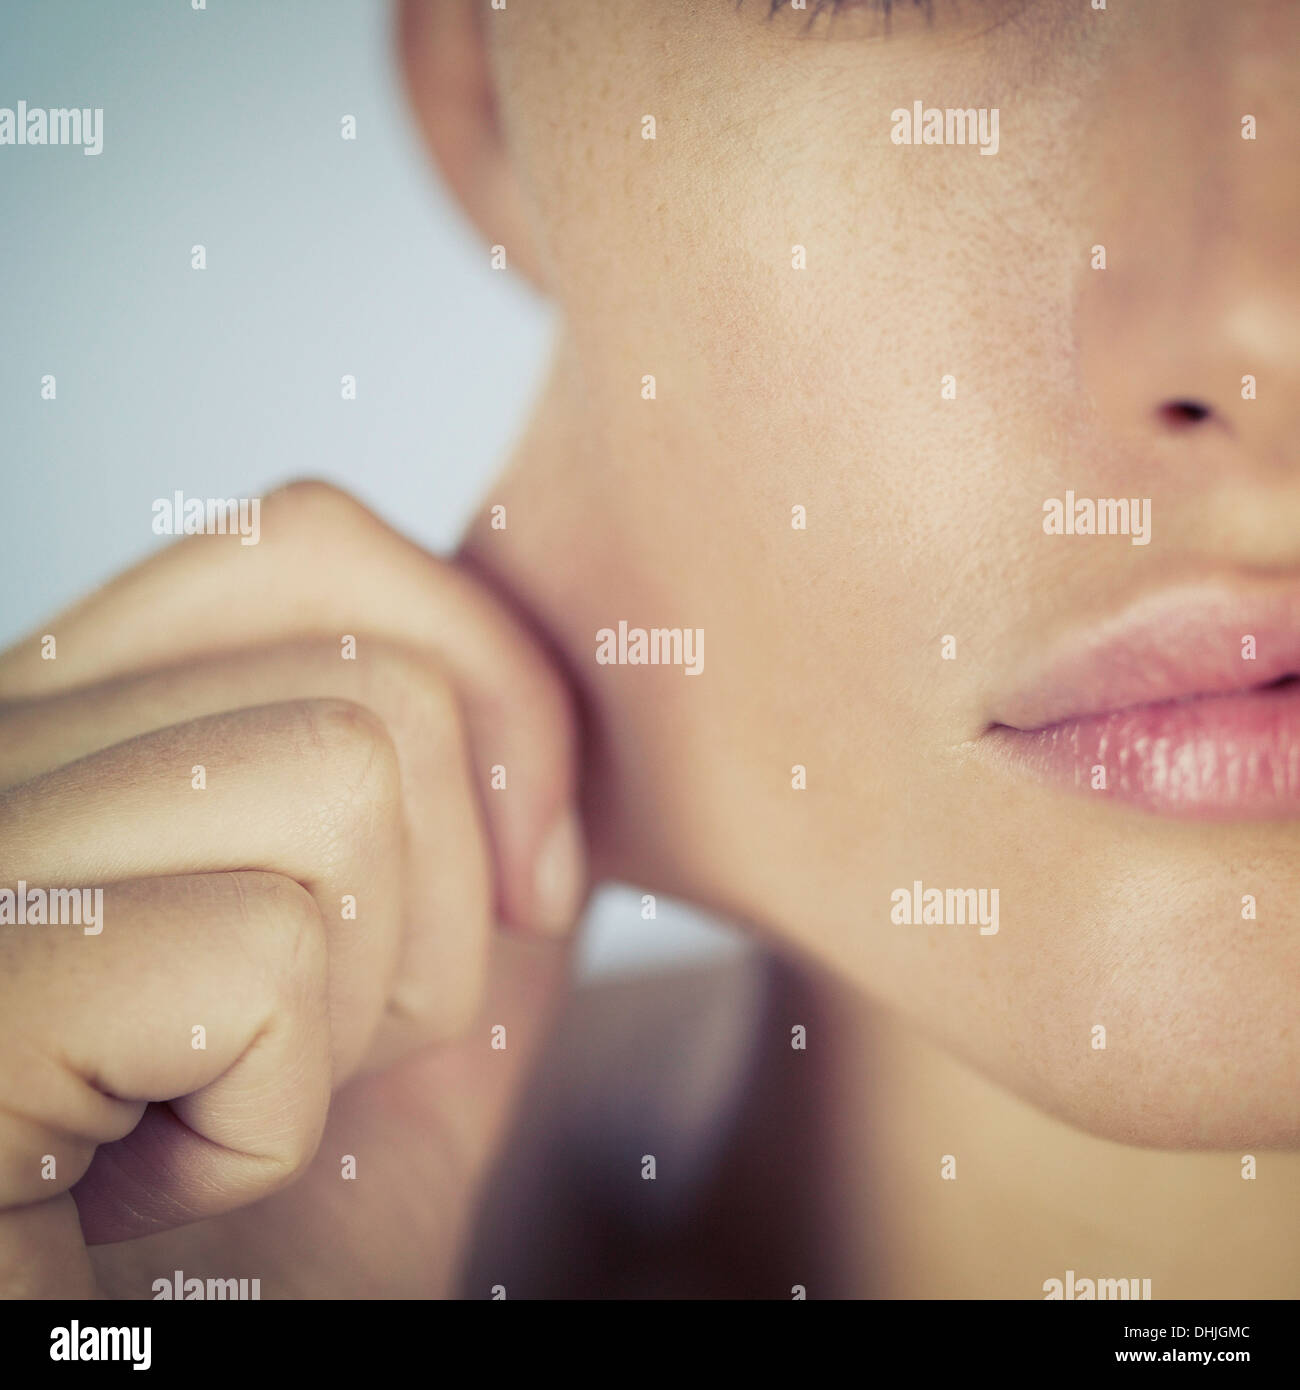 A young woman stretching the skin on her face Stock Photo